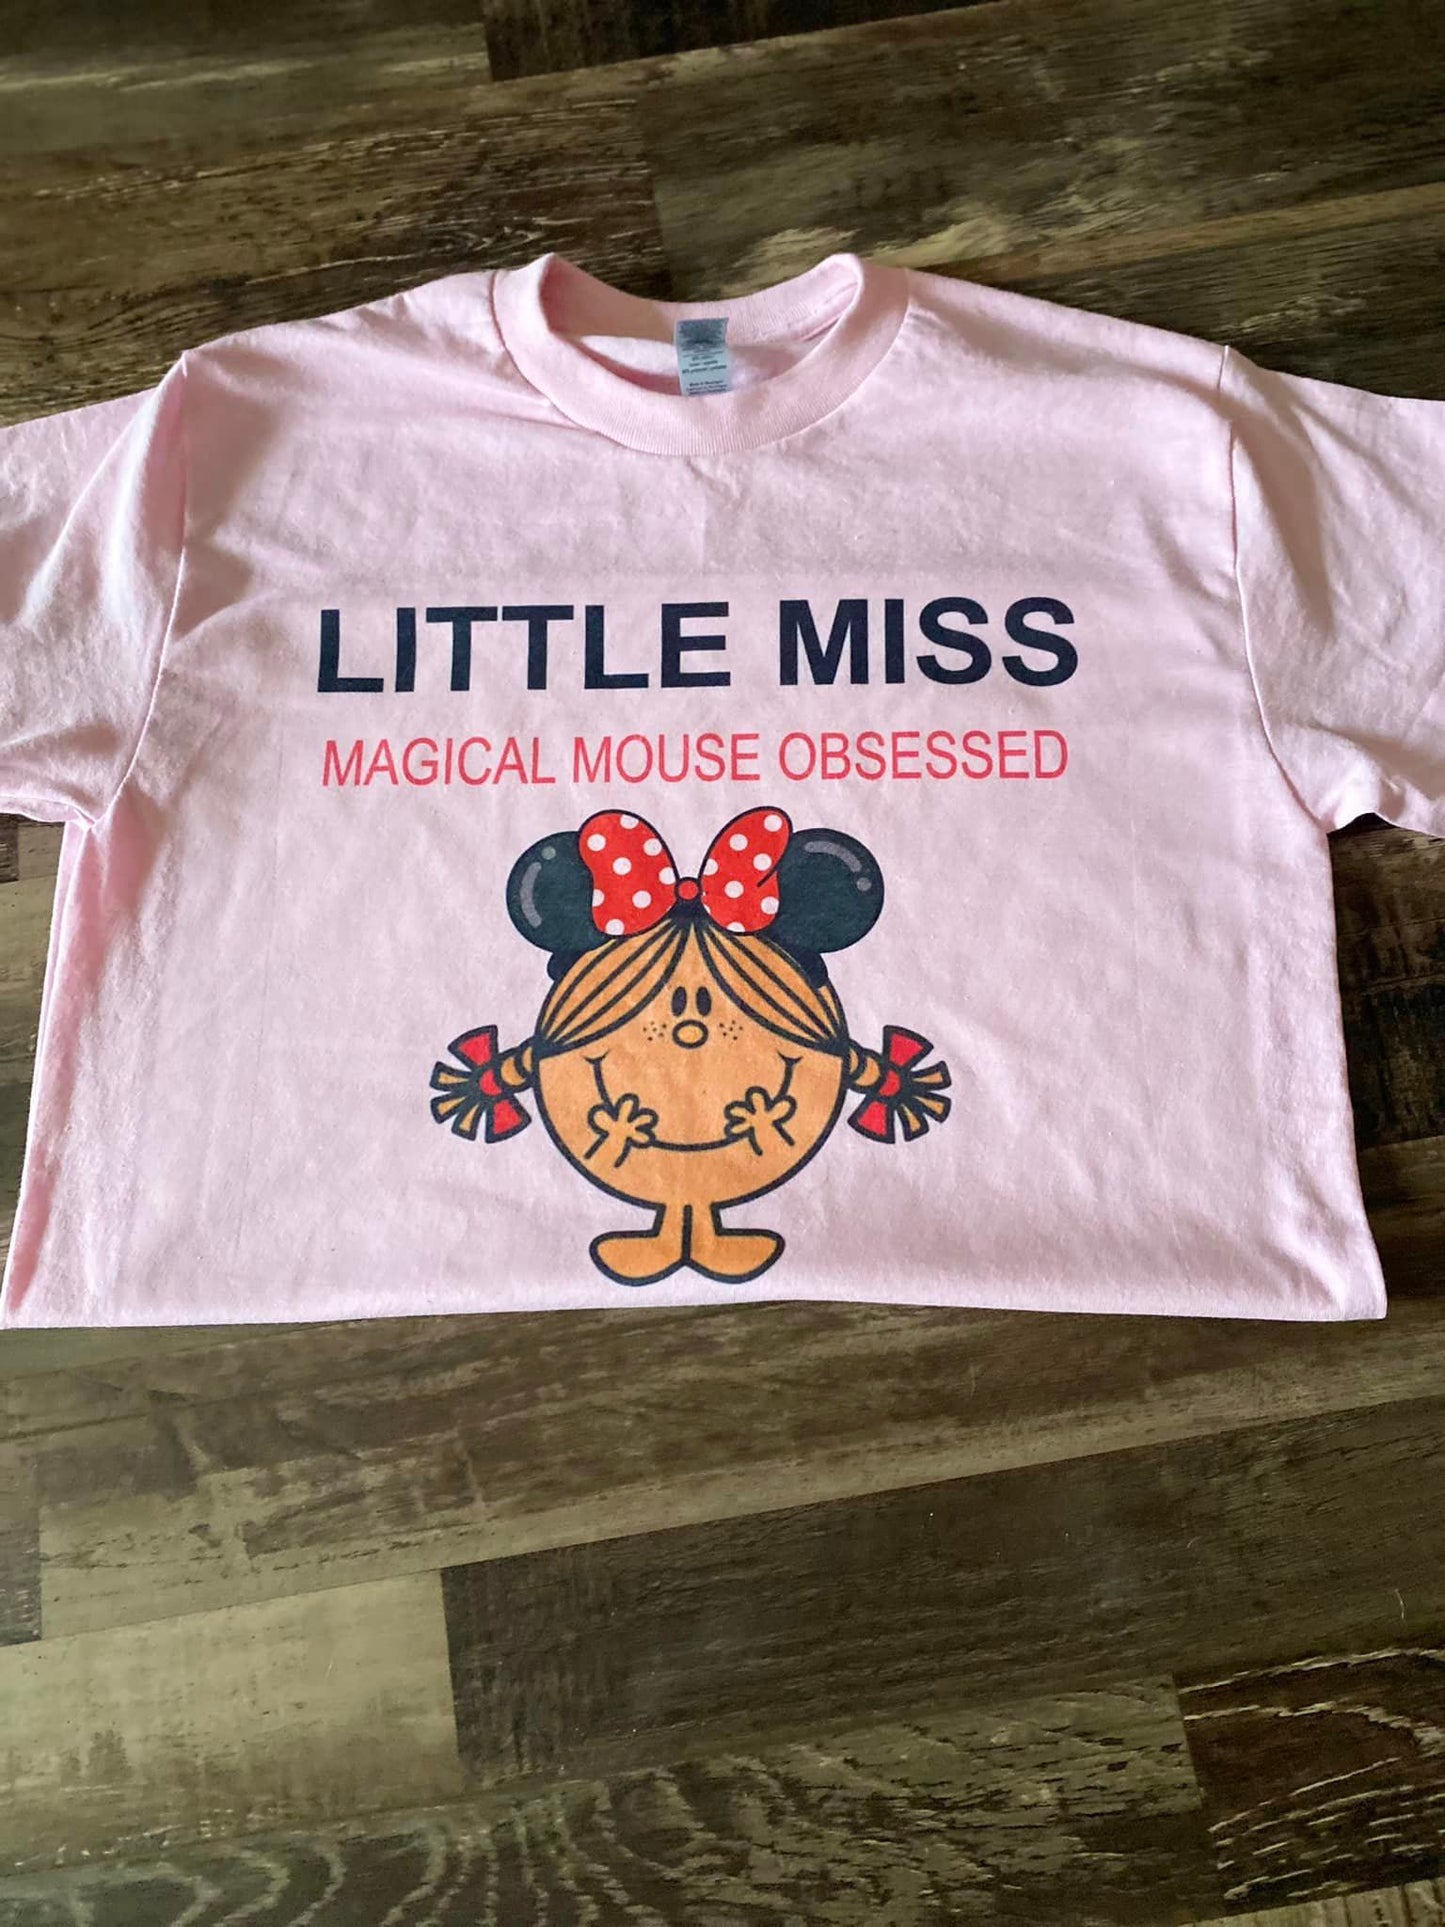 Little Miss Mouse obsessed